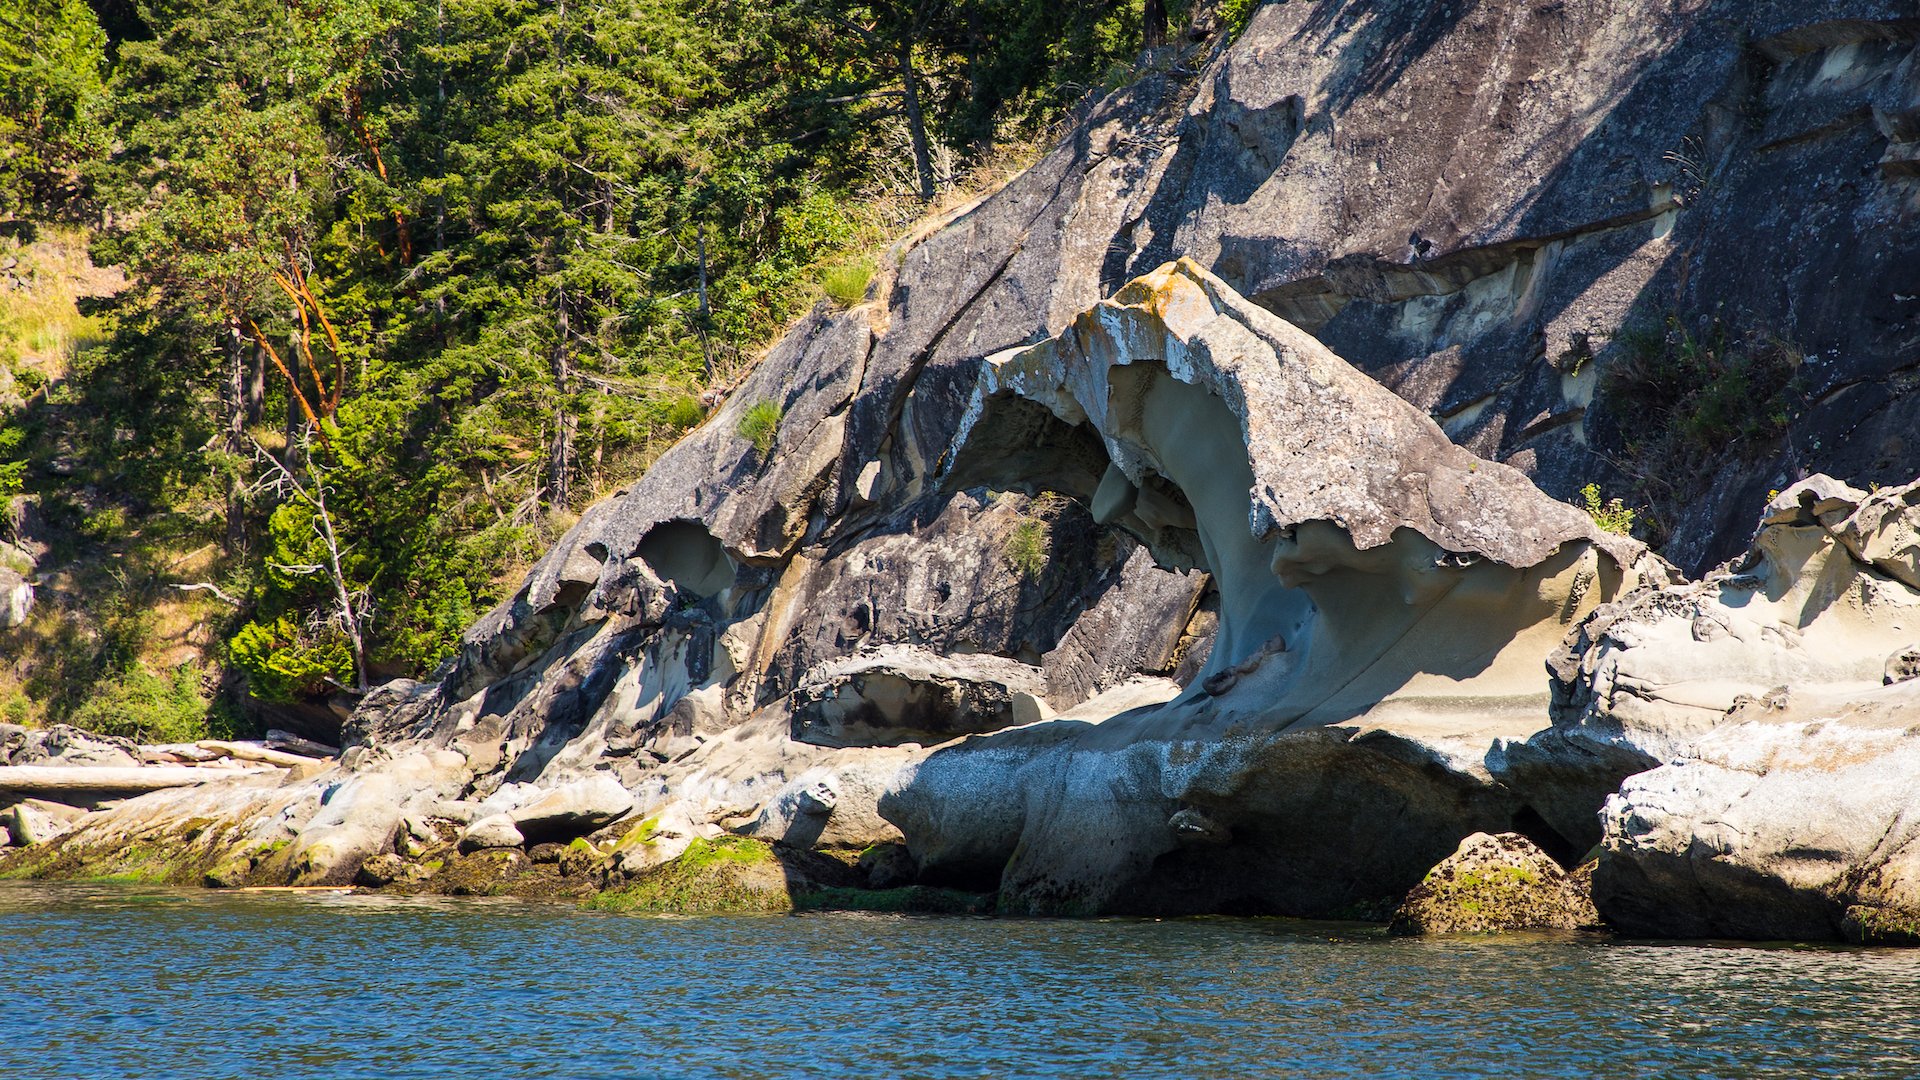  Close to the Galiano Conservancy, this amazing sandstone formation might have been the most interesting feature we saw. 